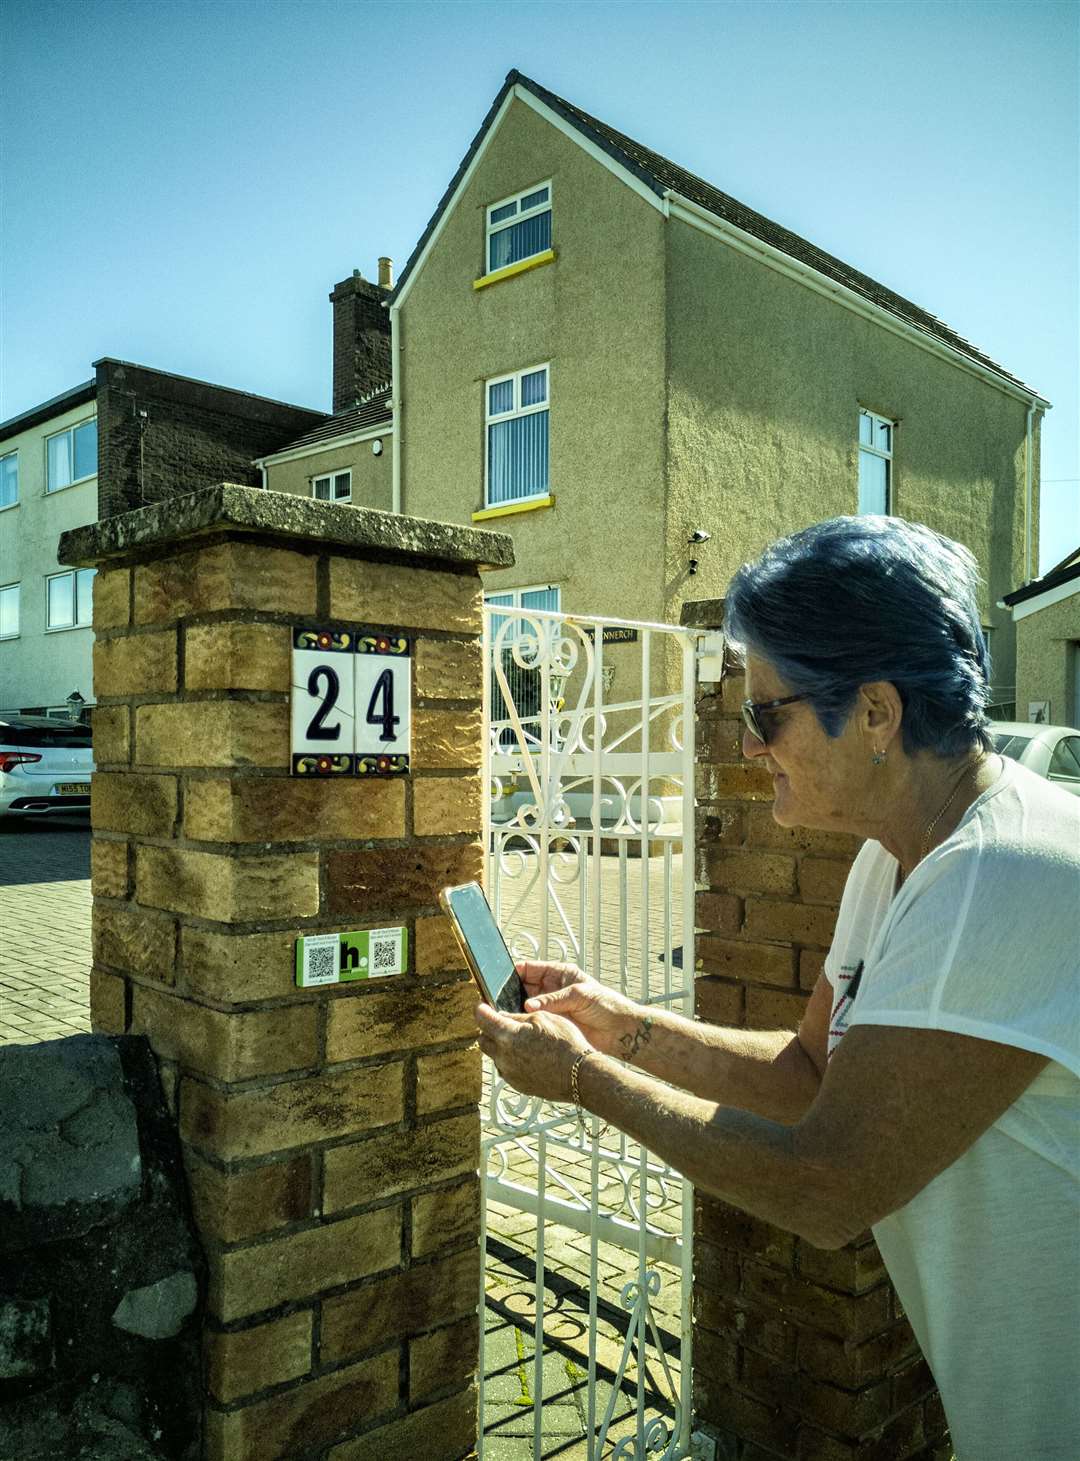 A visitor learns more about Rev Benjamin Winston's home in Rhyl thanks to the new QR codes as part of a history project uncovering secret links to the slave trade. Picture: HistoryPoints